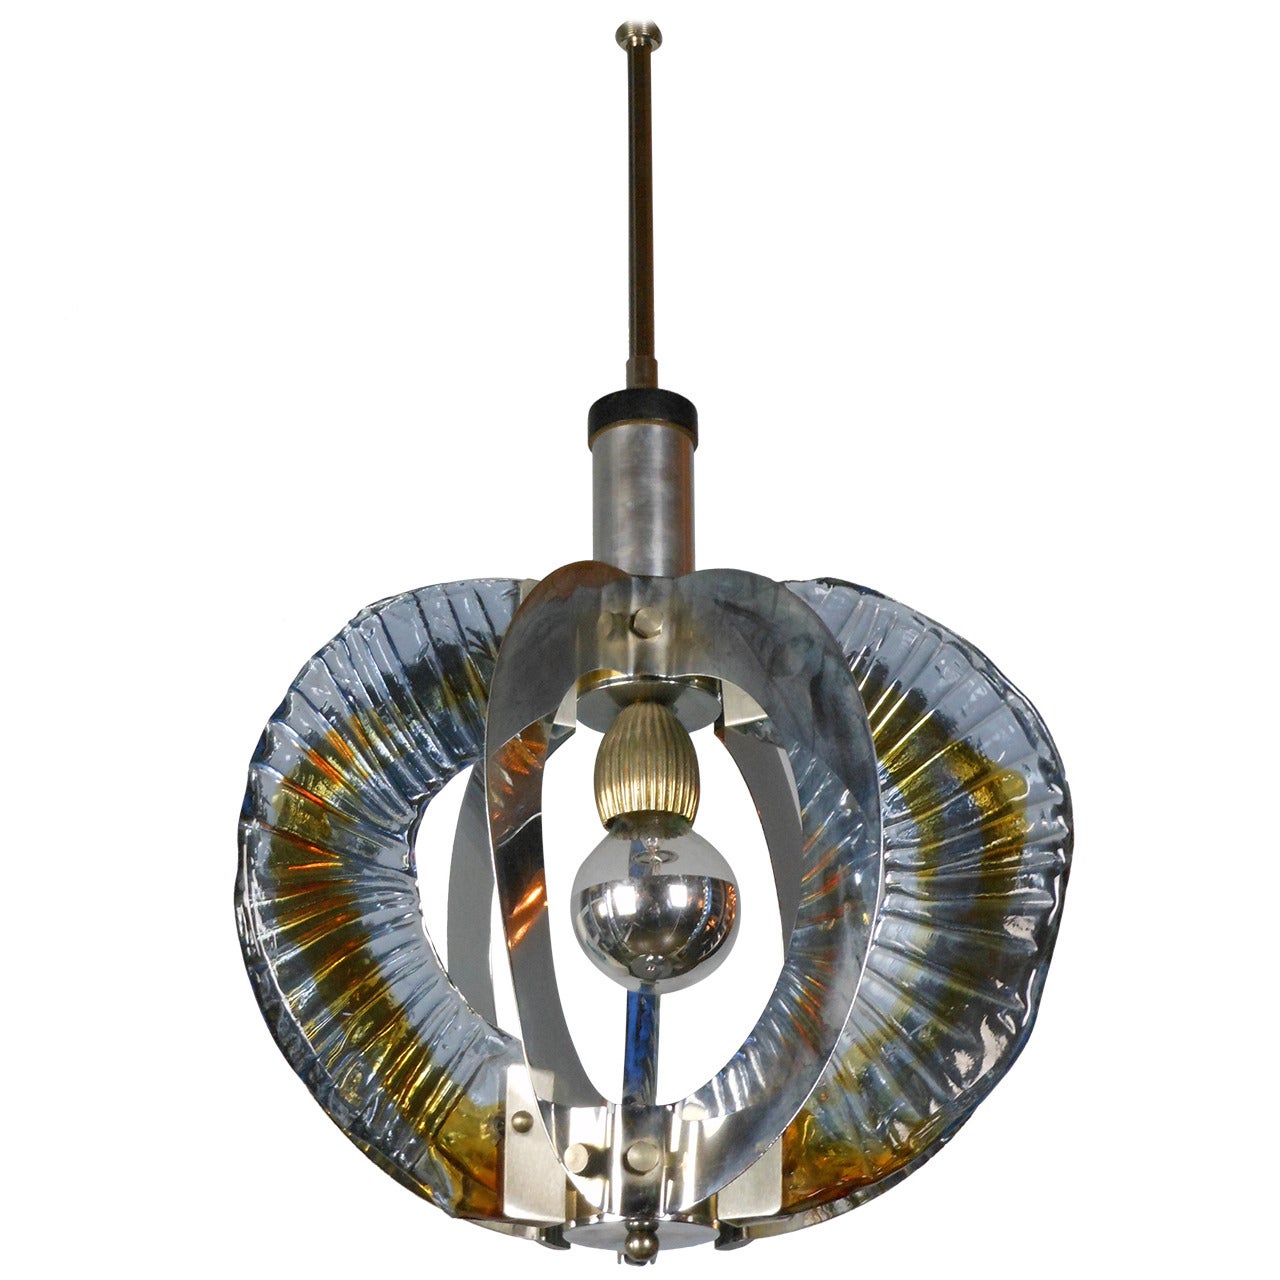 An Italian Mid-Century Murano Hanging Light by Mazzega For Sale